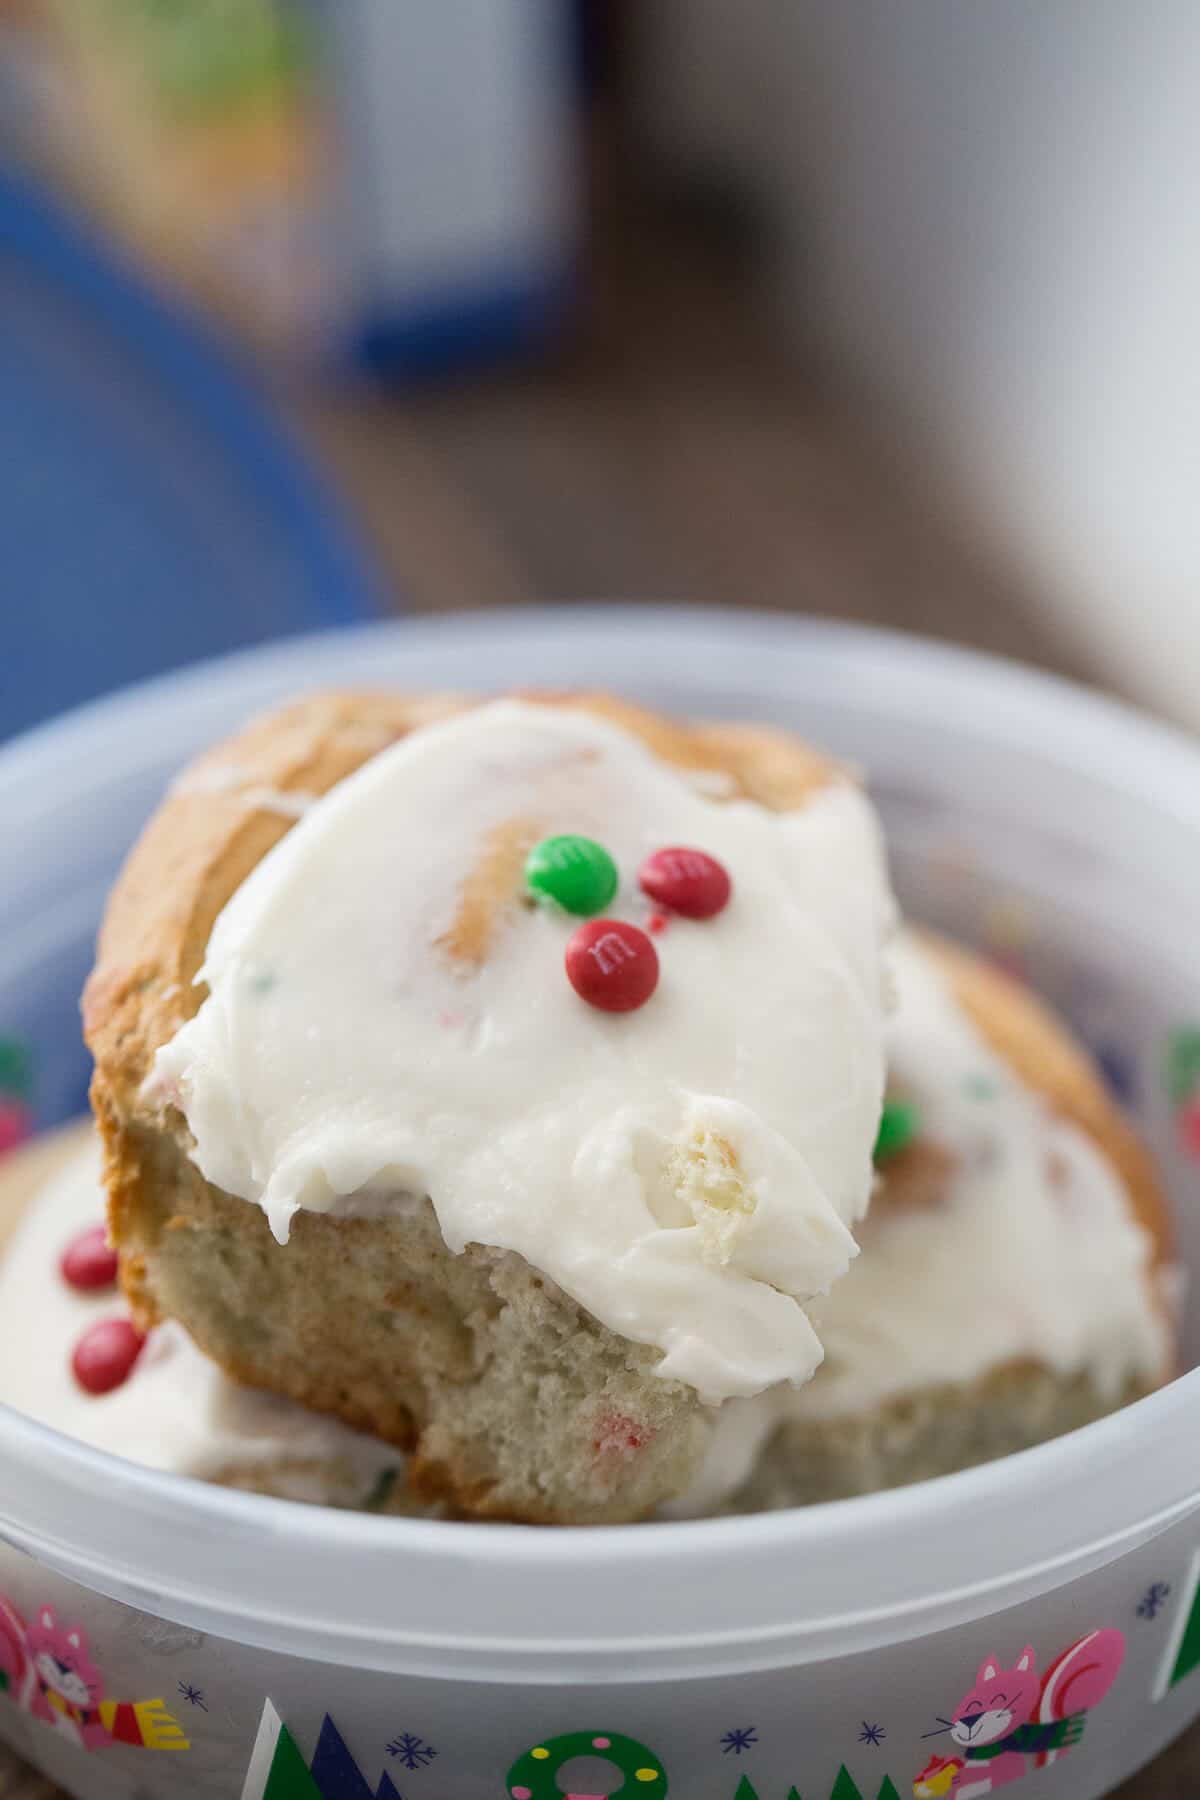 These cake mix cinnamon rolls will make breakfast festive, sweet and delicious!